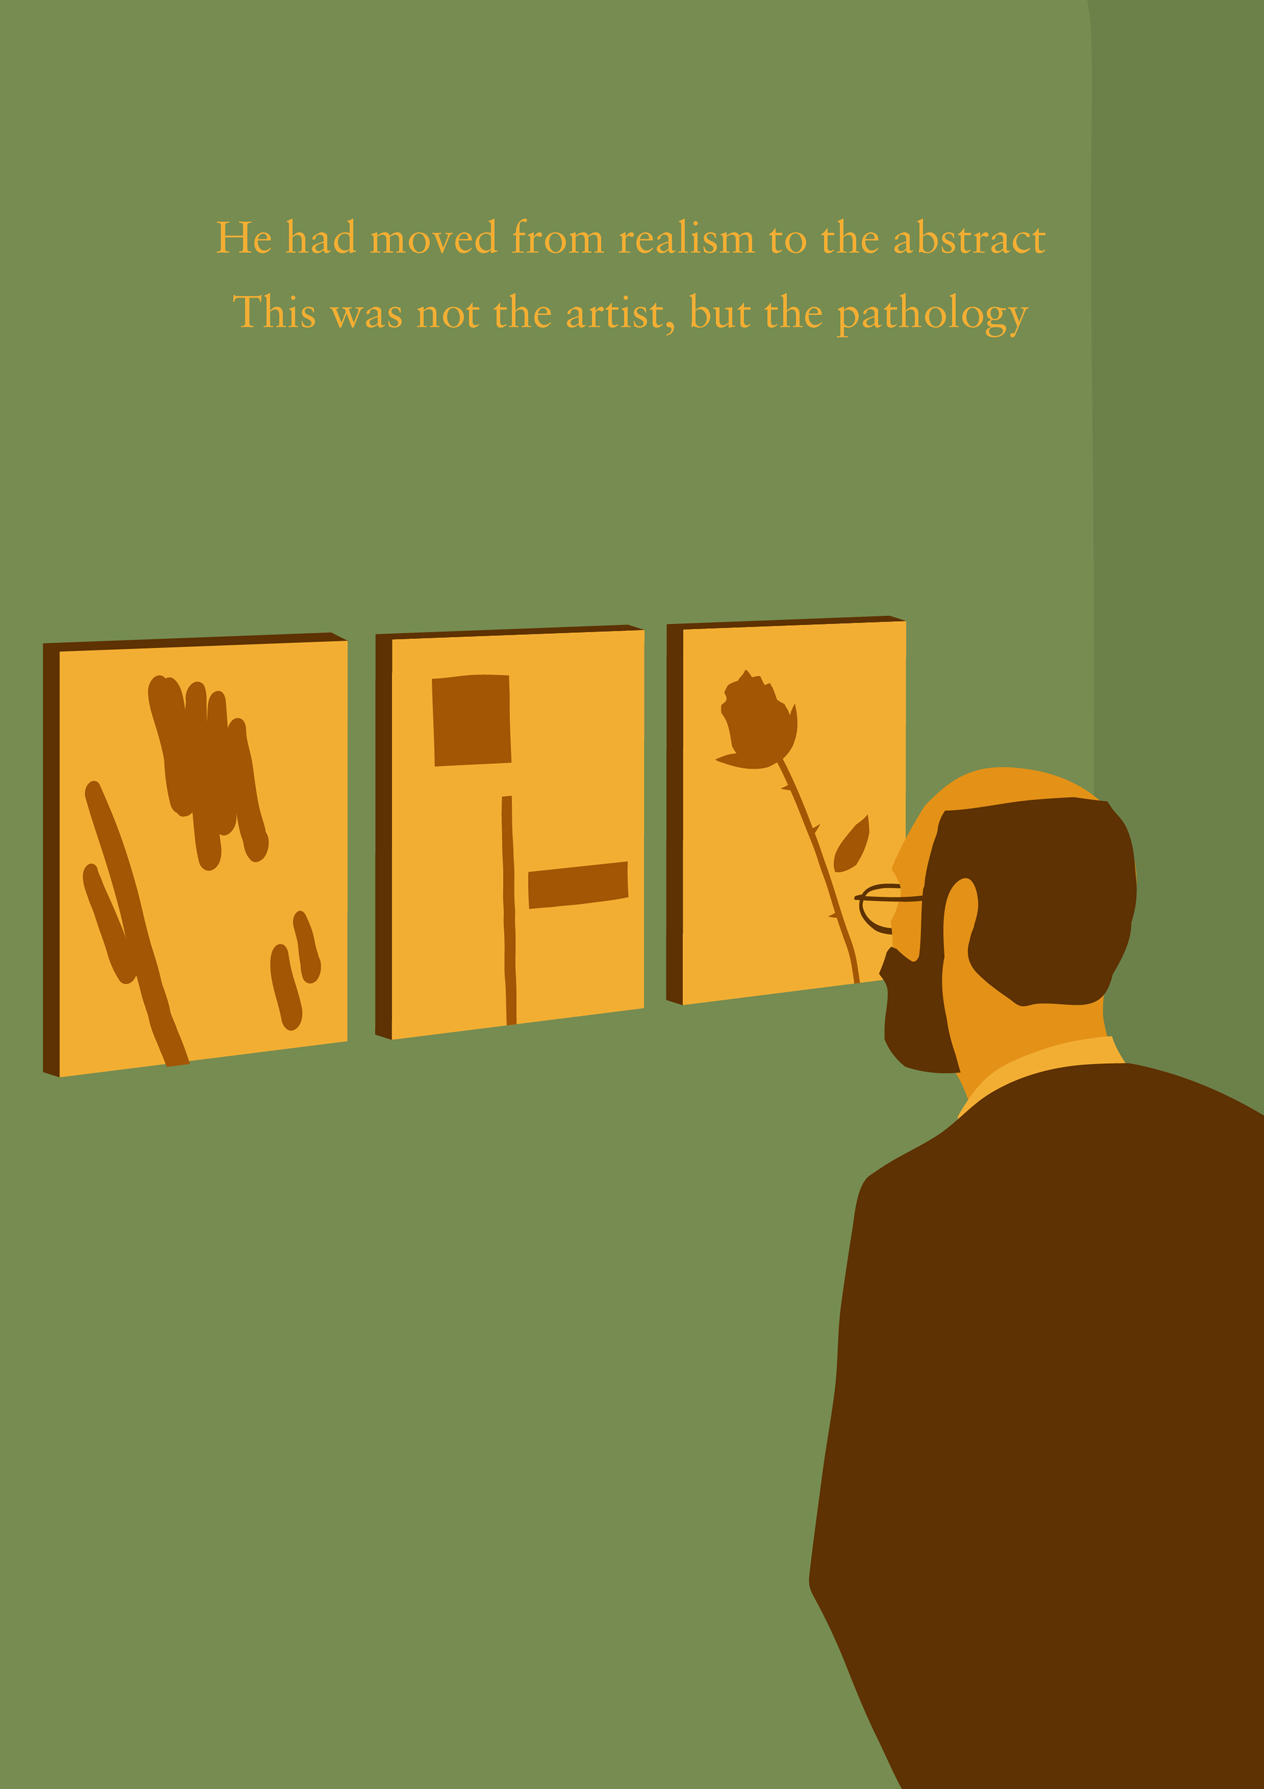 Illustrated of the scene: “He had moved from realism to the abstract, this was not the artist, but the pathology”